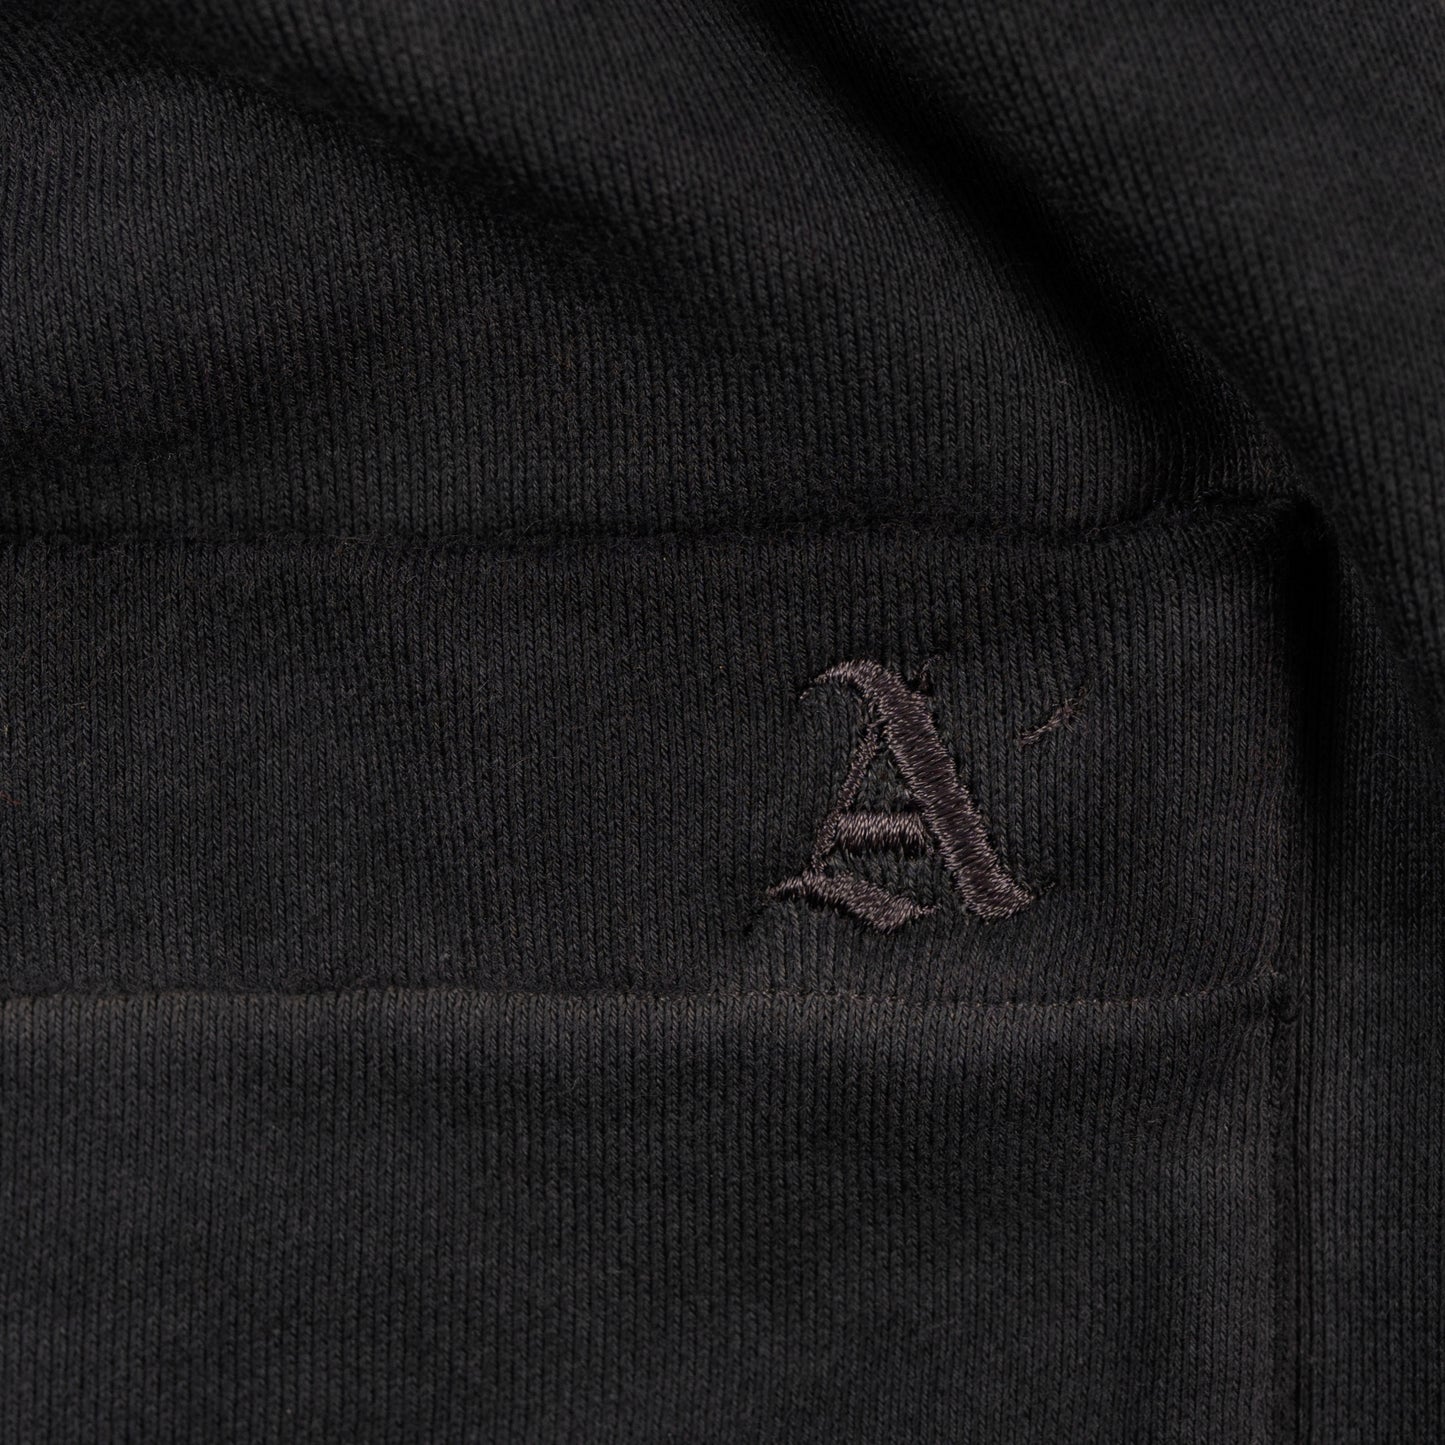 Detail View of Embroidered 'A' on Allora Track Pants by Aseye Studio